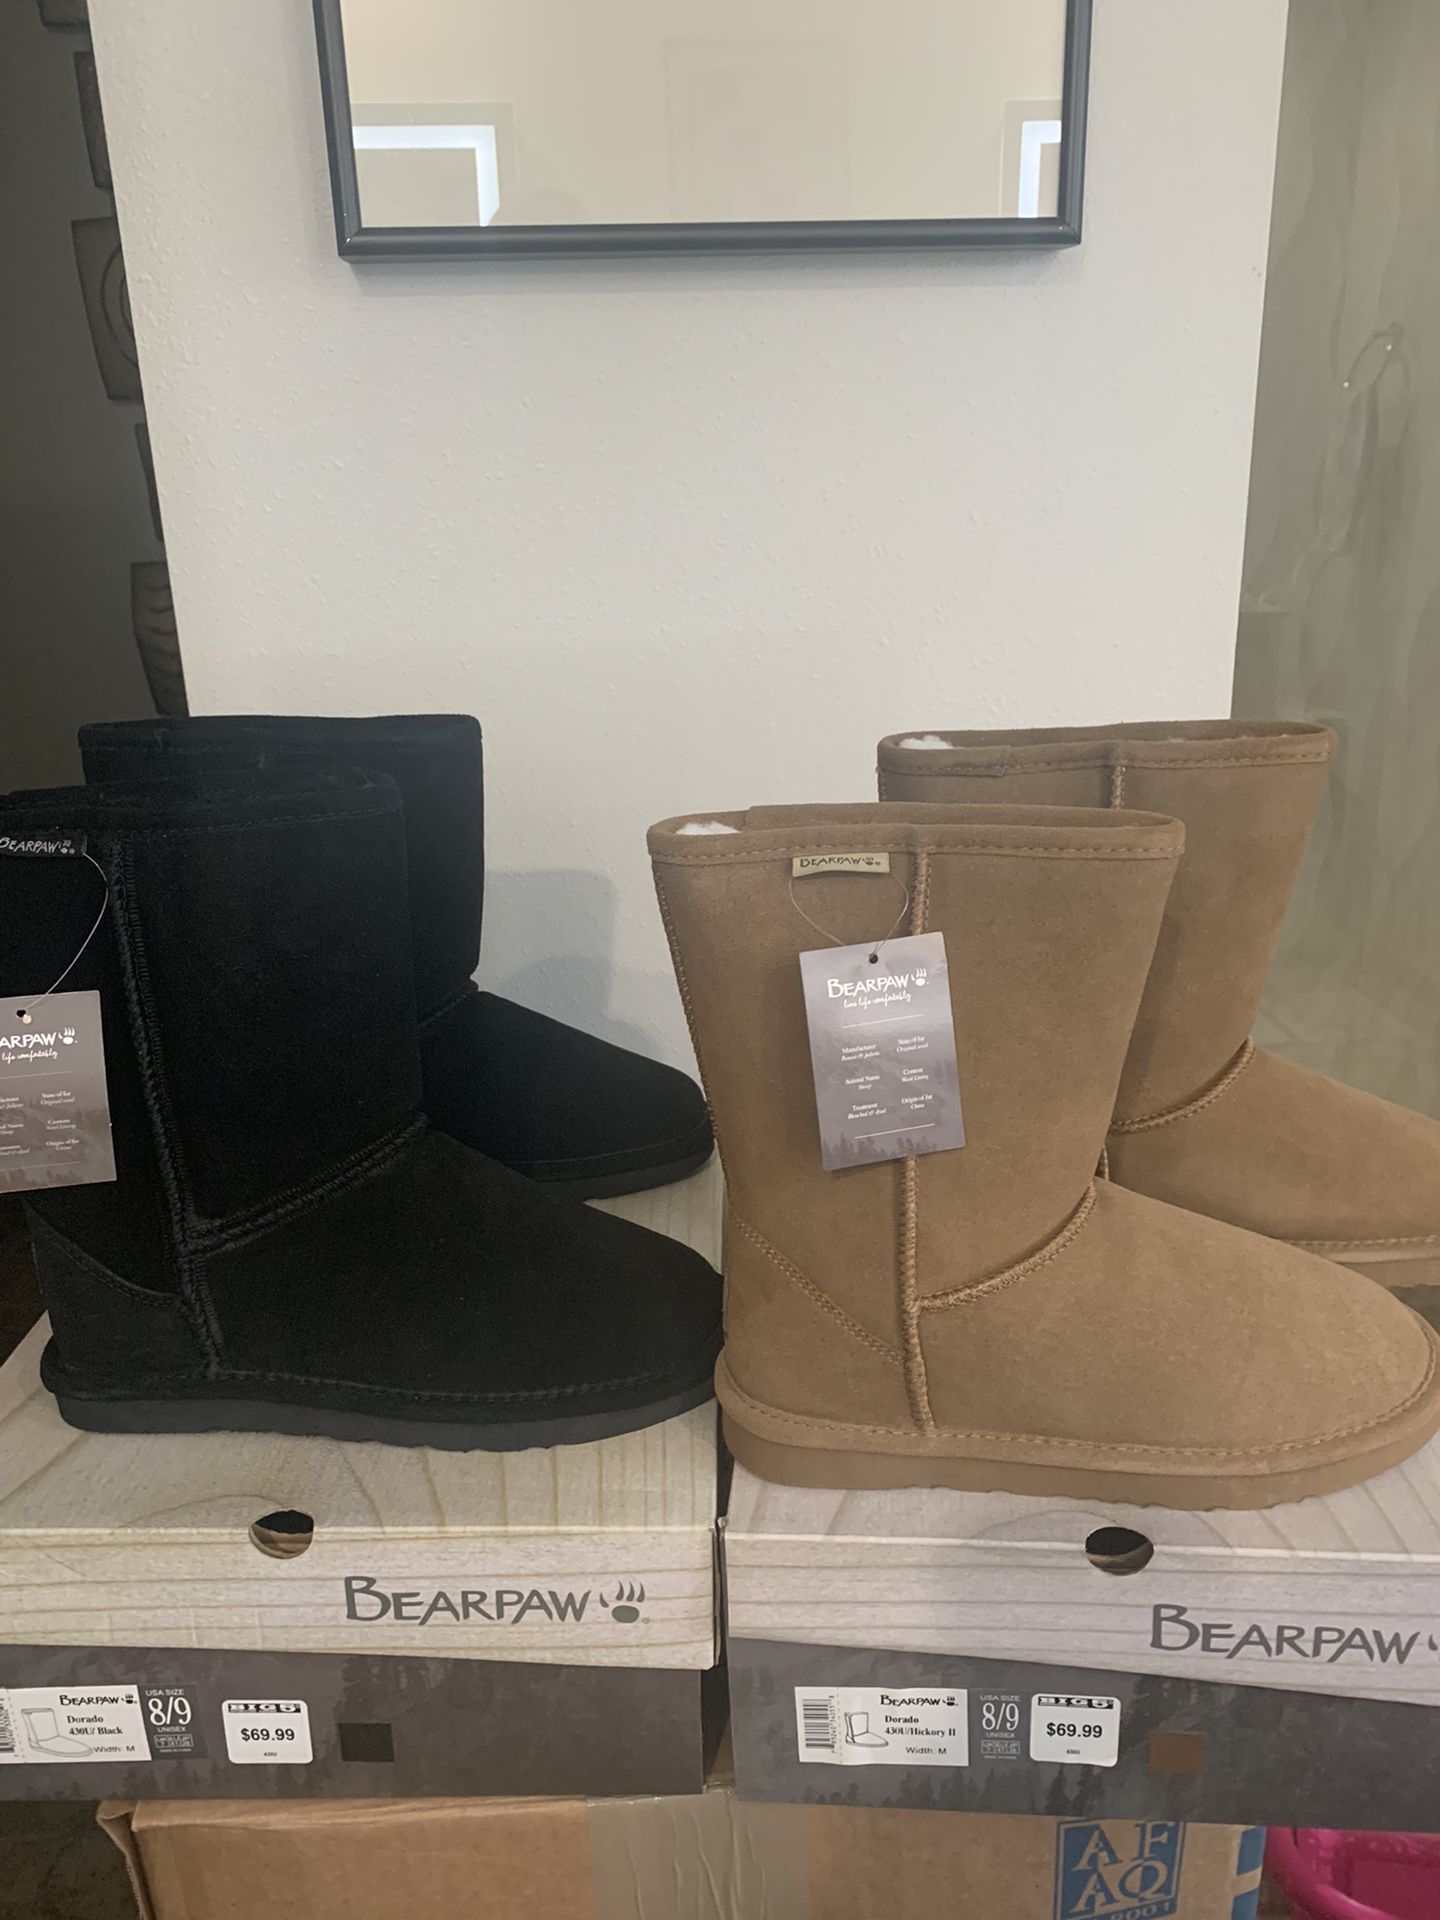 Bearpaw Comfy Boots Size 8/9